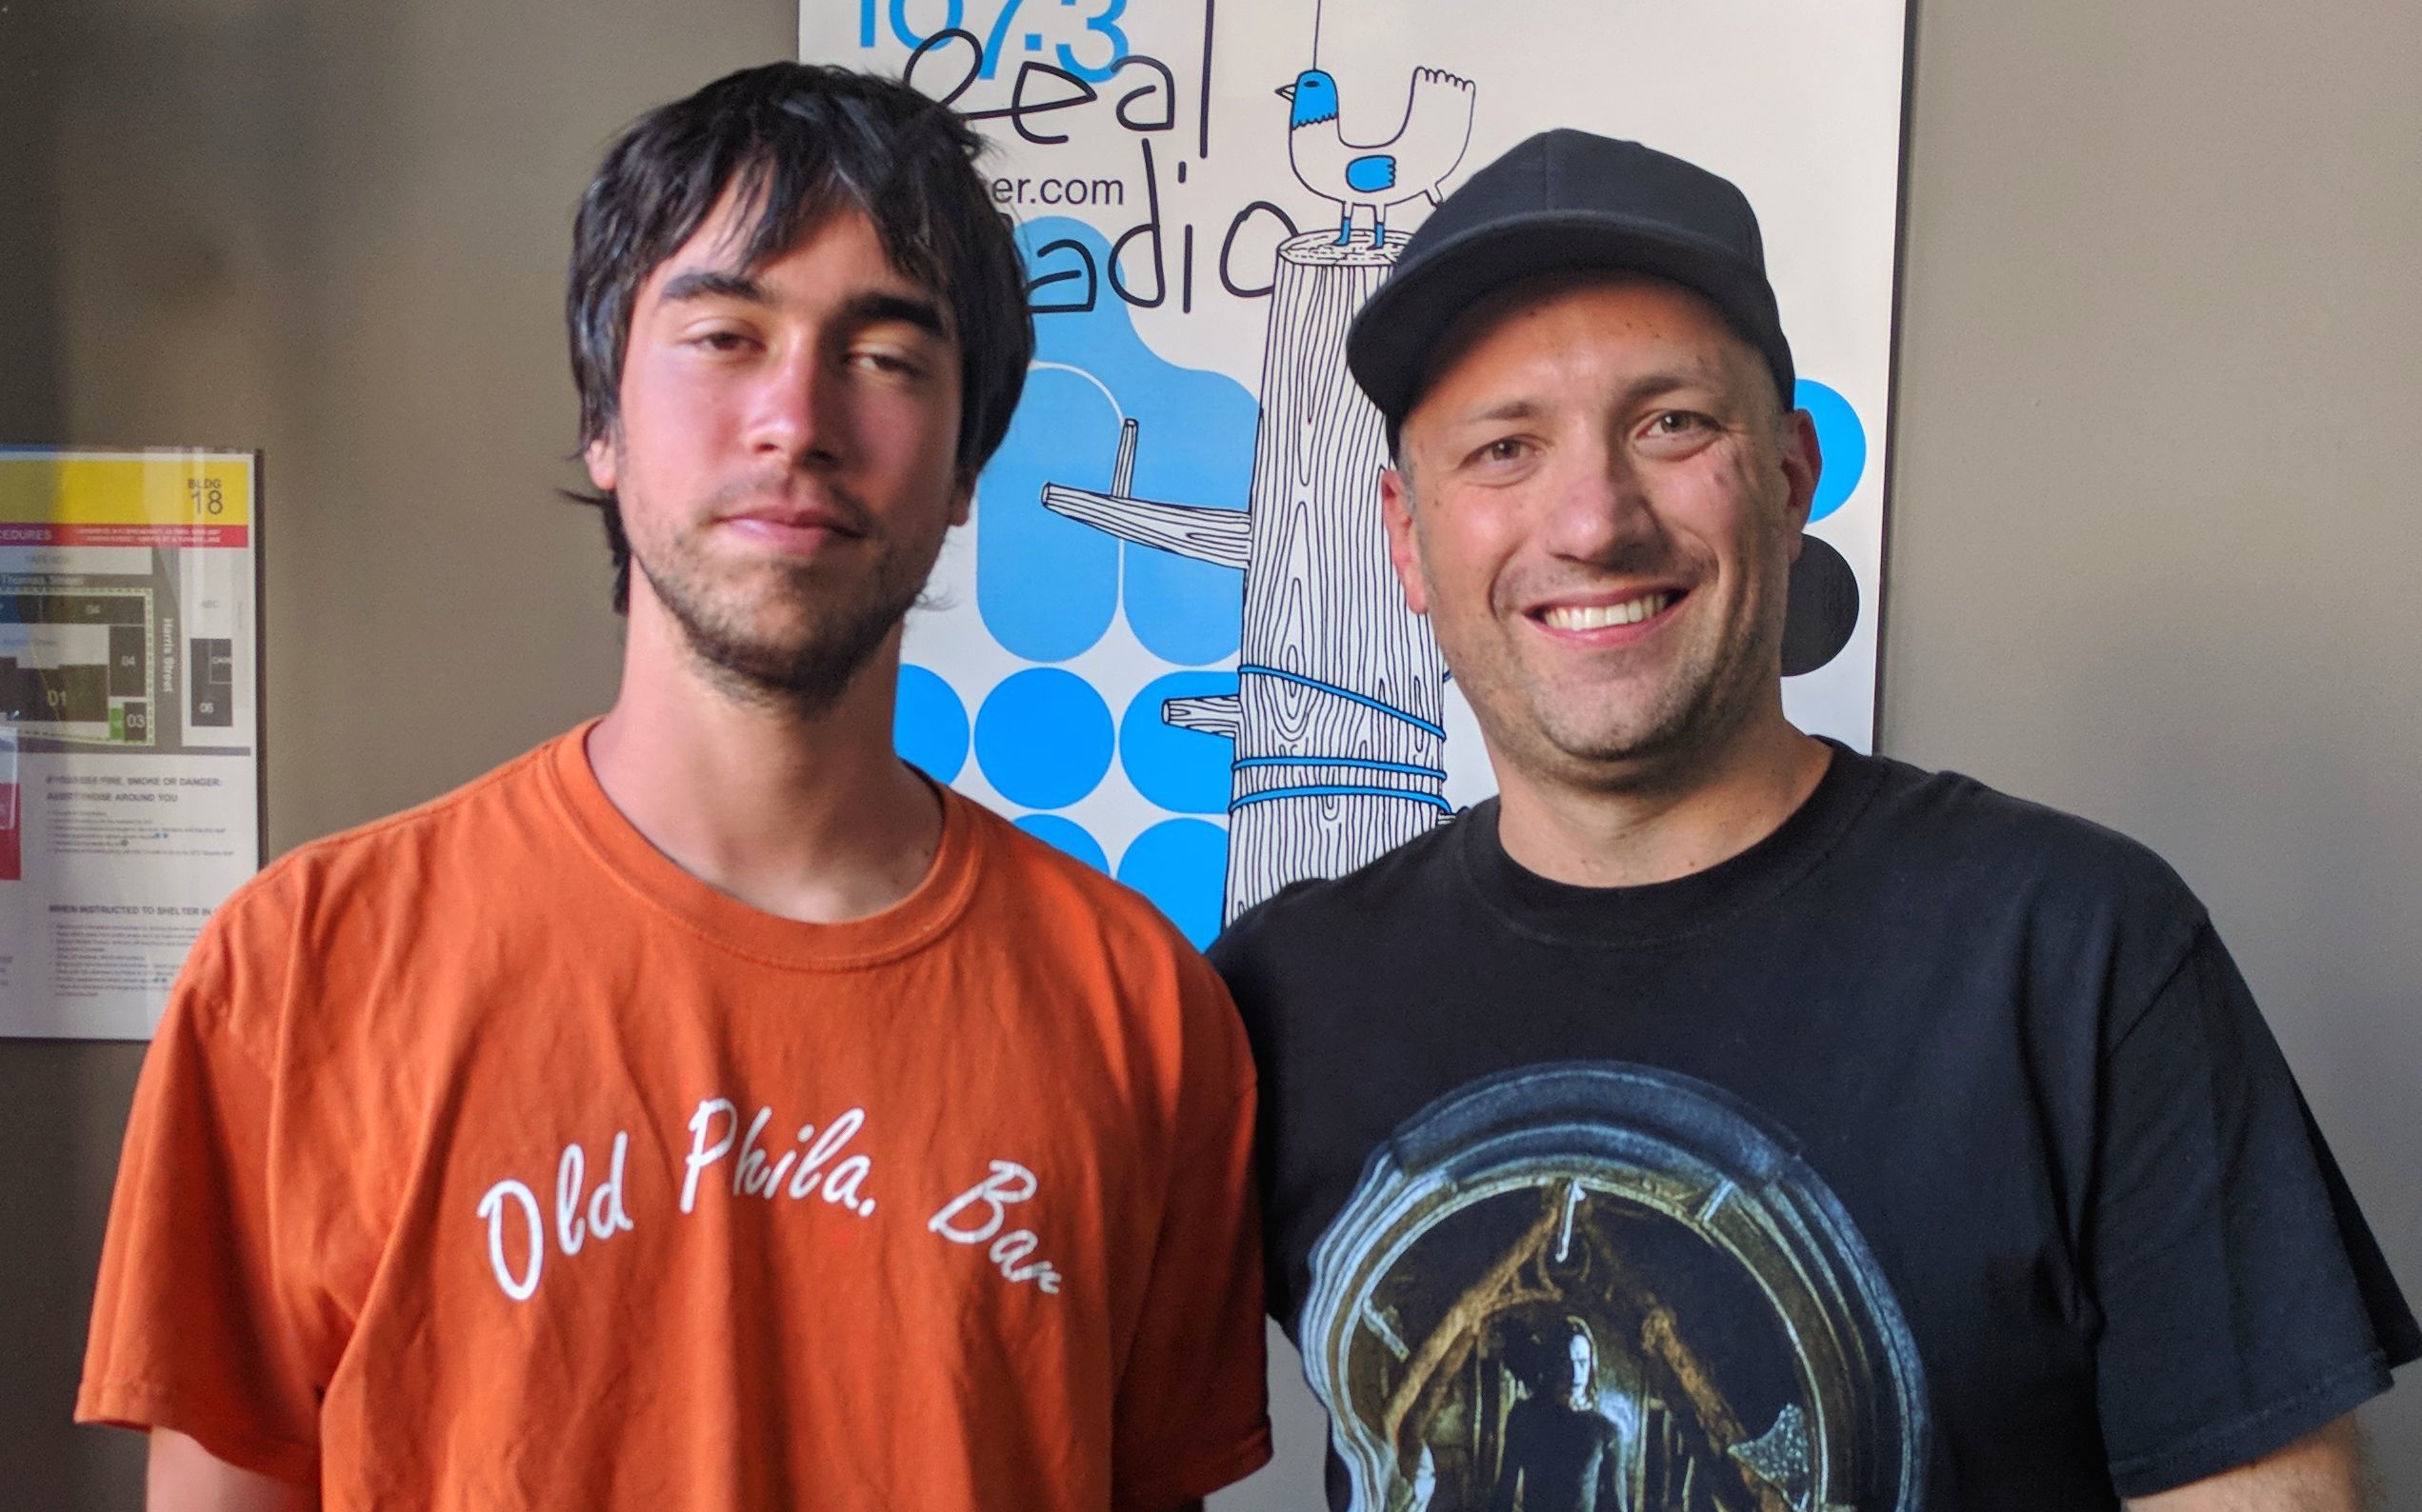 Alex G isn't just proud of his music, he plays it live in the studio